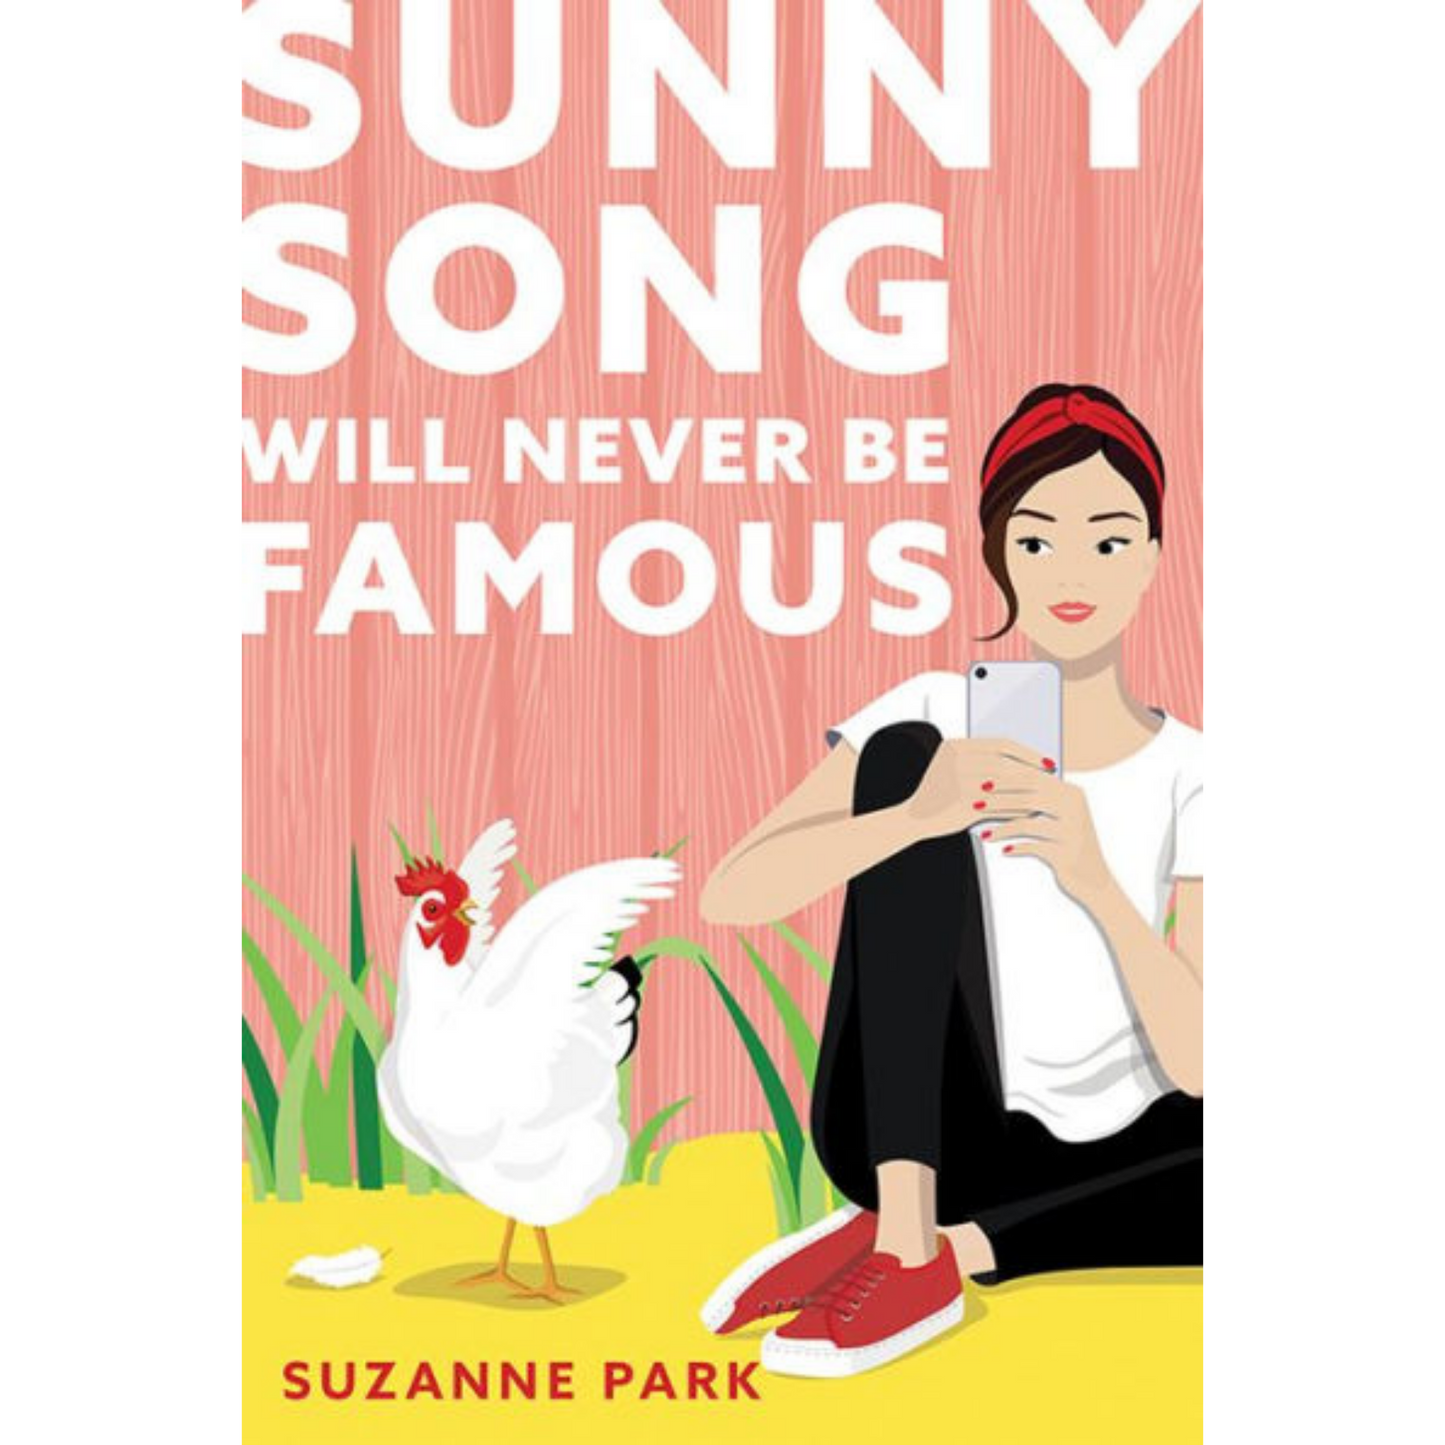 sunny song will never be famous suzanne park